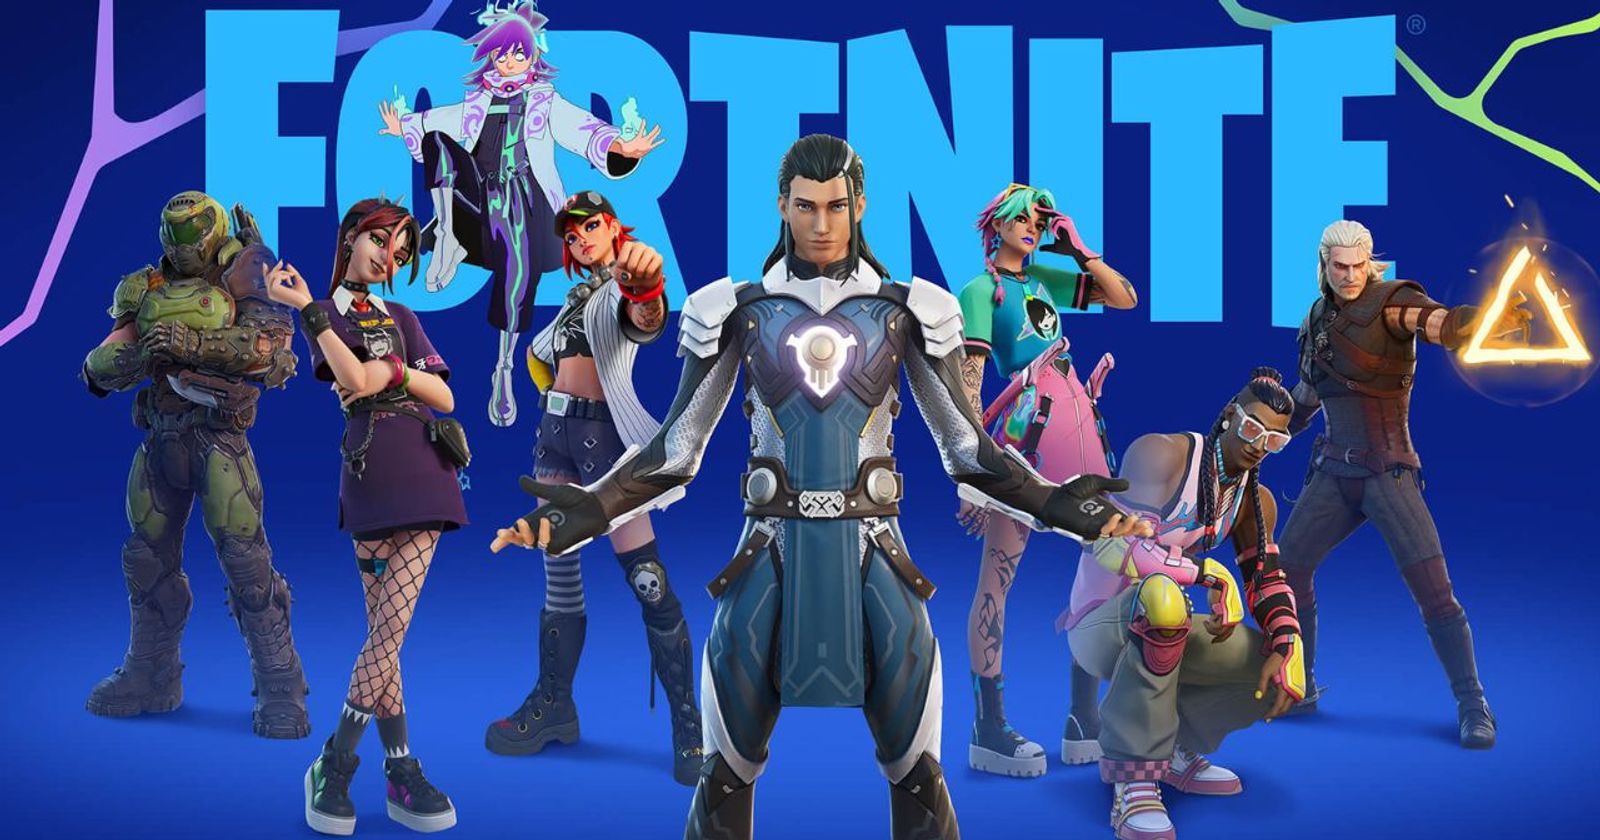 Fortnite 2 - News and what we'd love to see